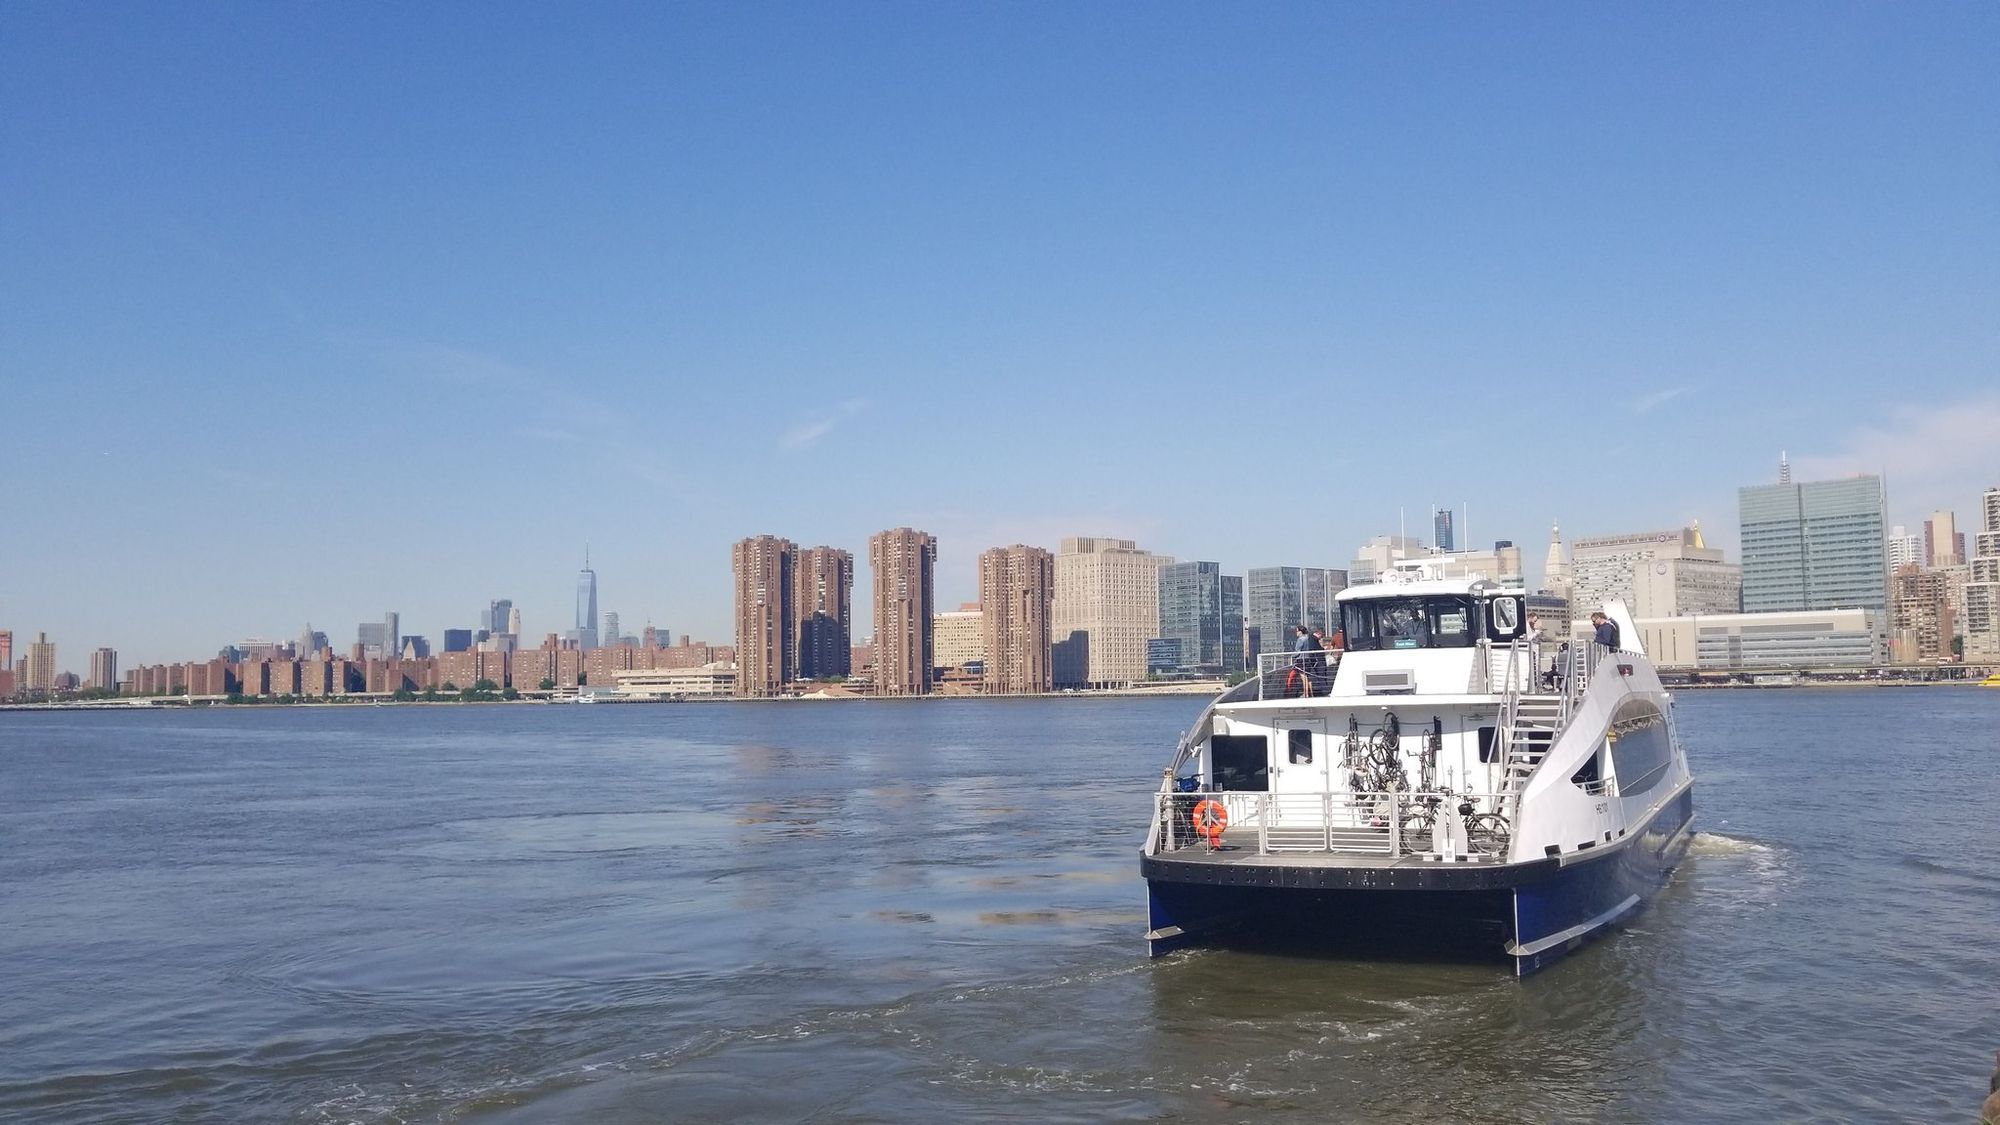 Want Ferry Service In Your Area? Let NYCEDC Know.